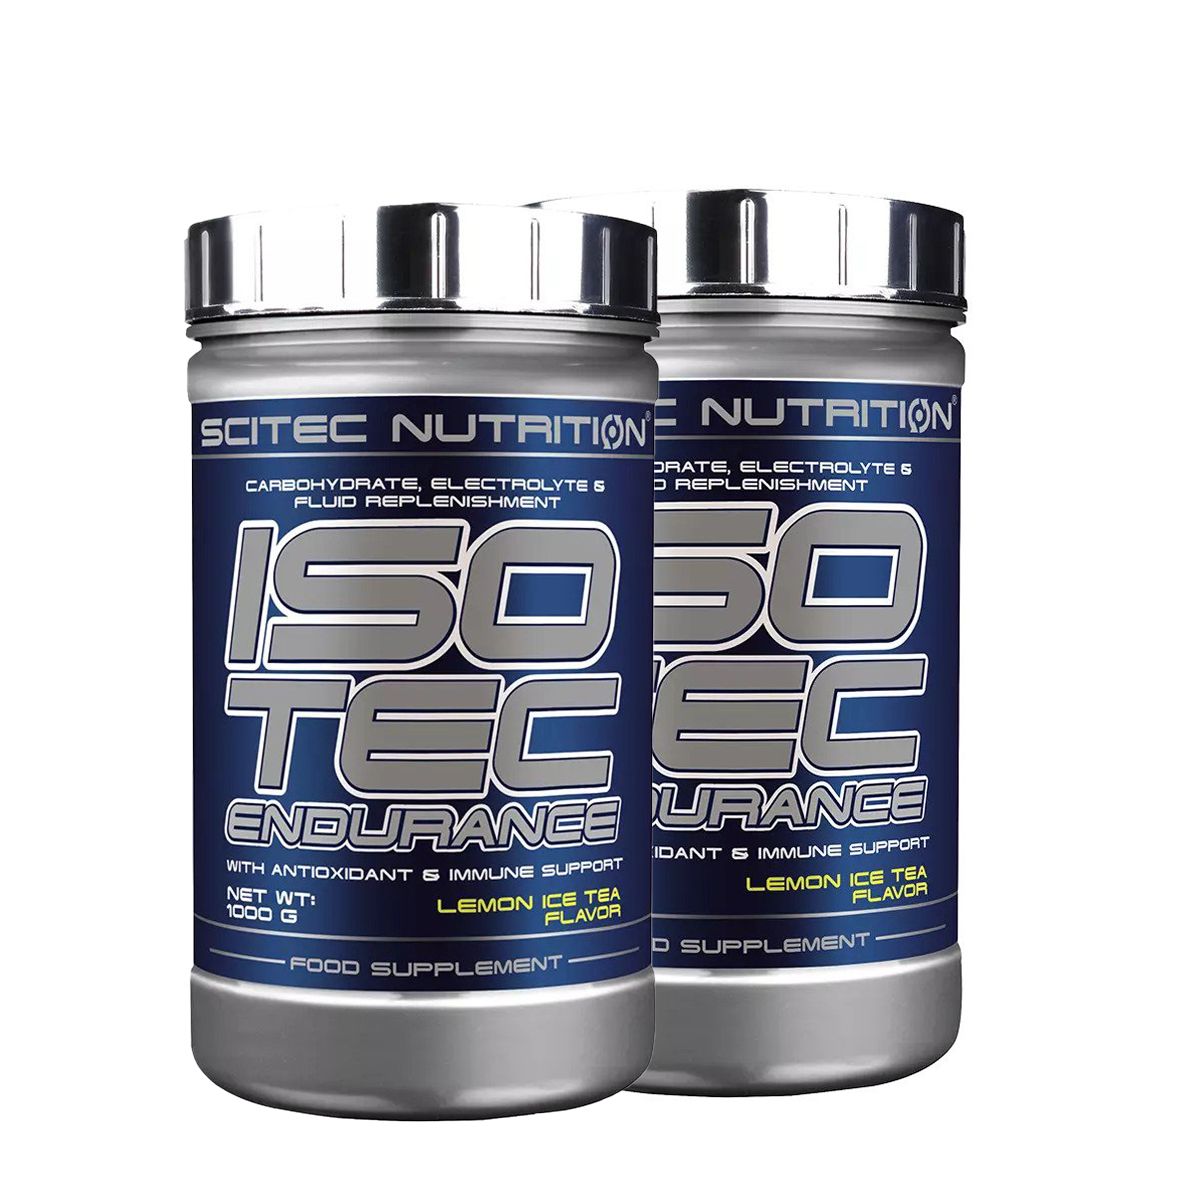 SCITEC NUTRITION - ISOTEC - CARBOHYDRATE & FLUID REPLENISHMENT FORMULA - 2 x 1000 G (HG)